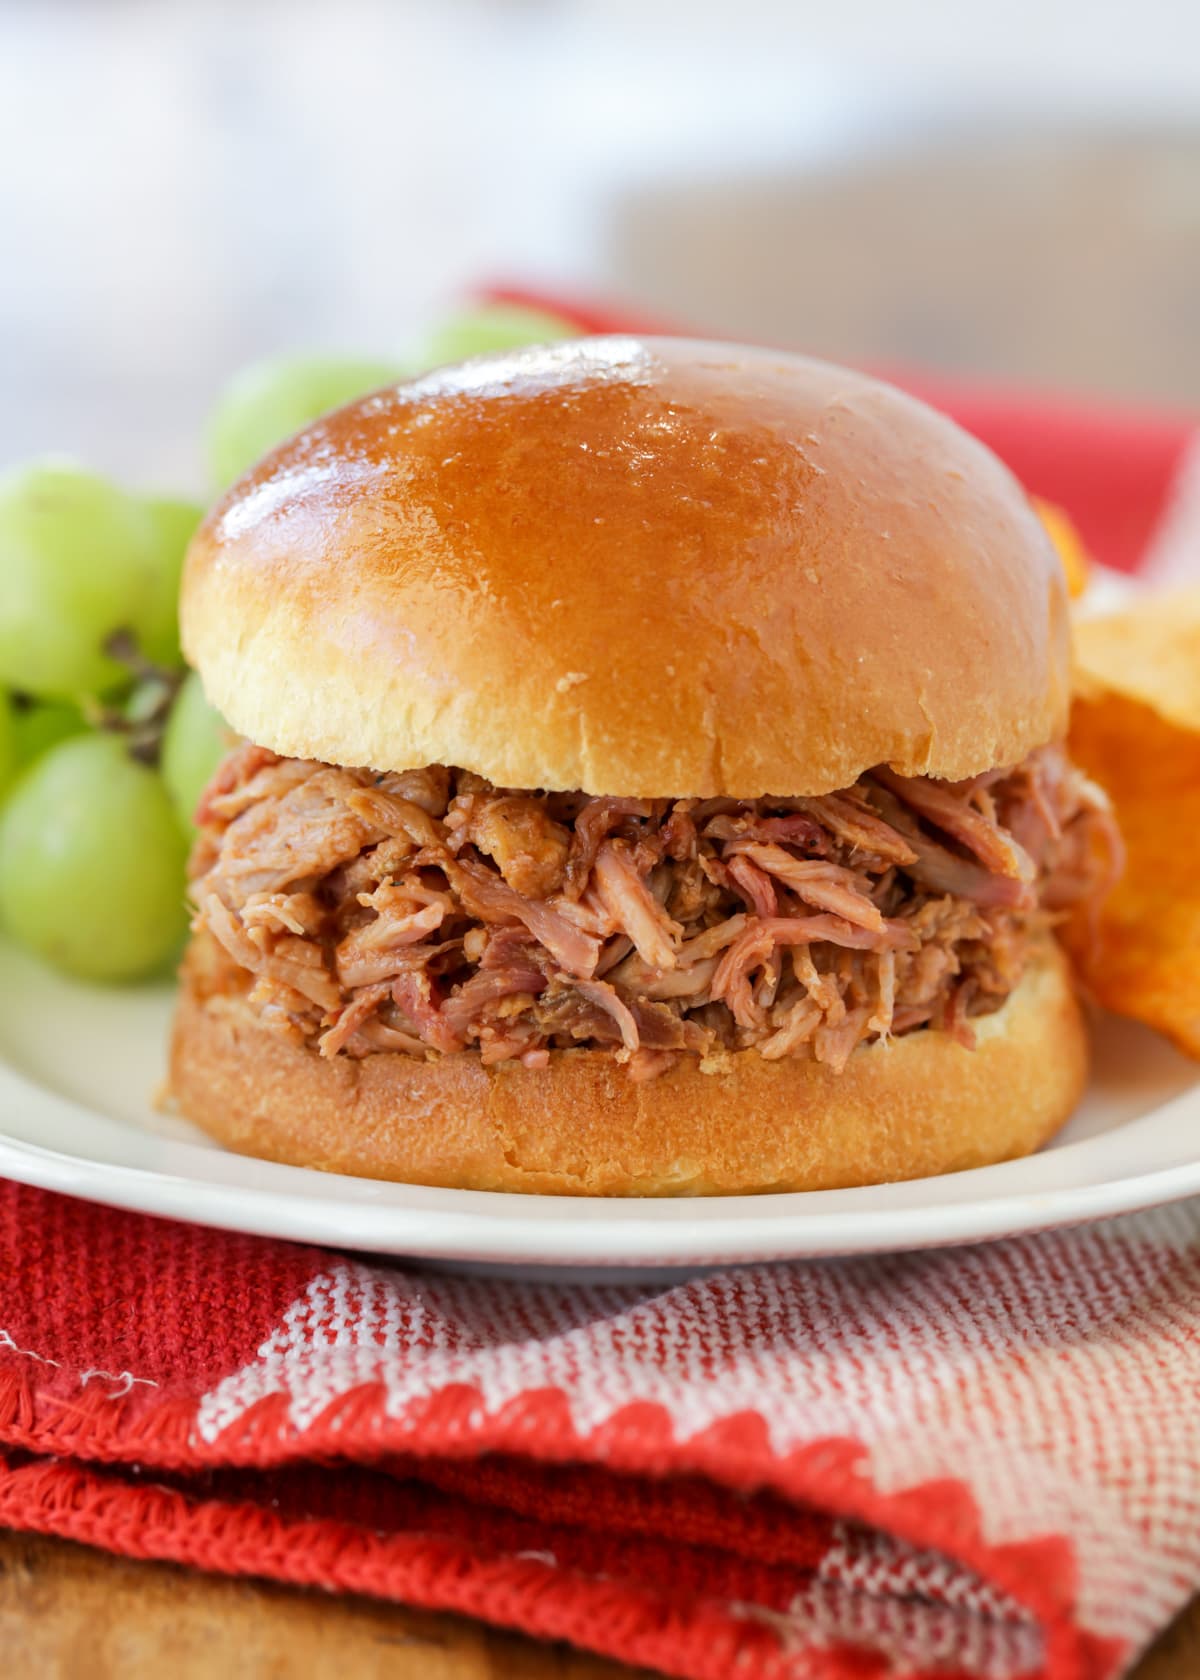 Pulled pork recipe served on a bun with grapes.